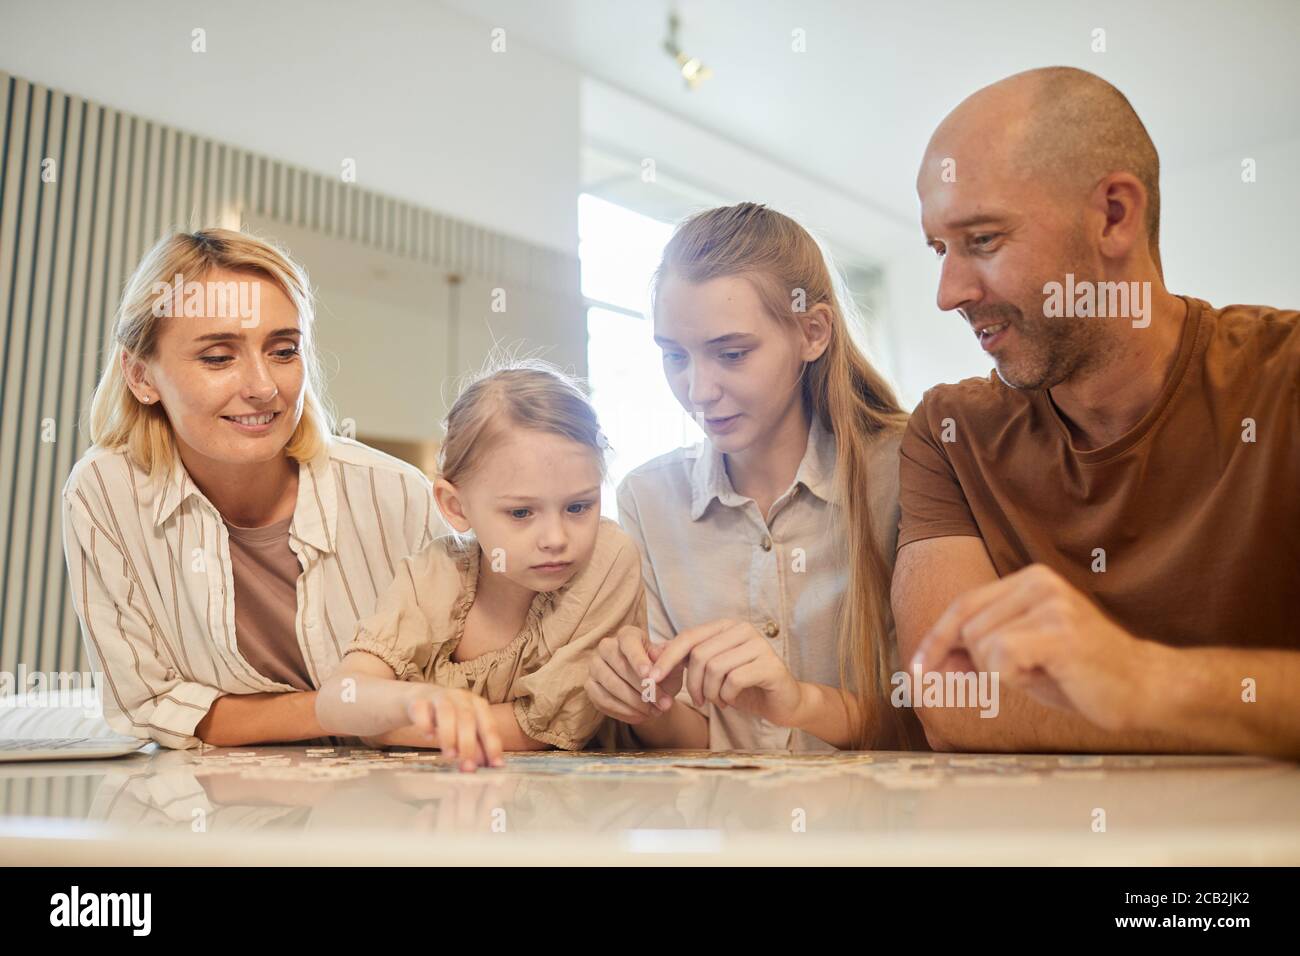 Warm-toned low angle portrait of modern family with two kids solving puzzle together while enjoying time indoors at home, copy space Stock Photo